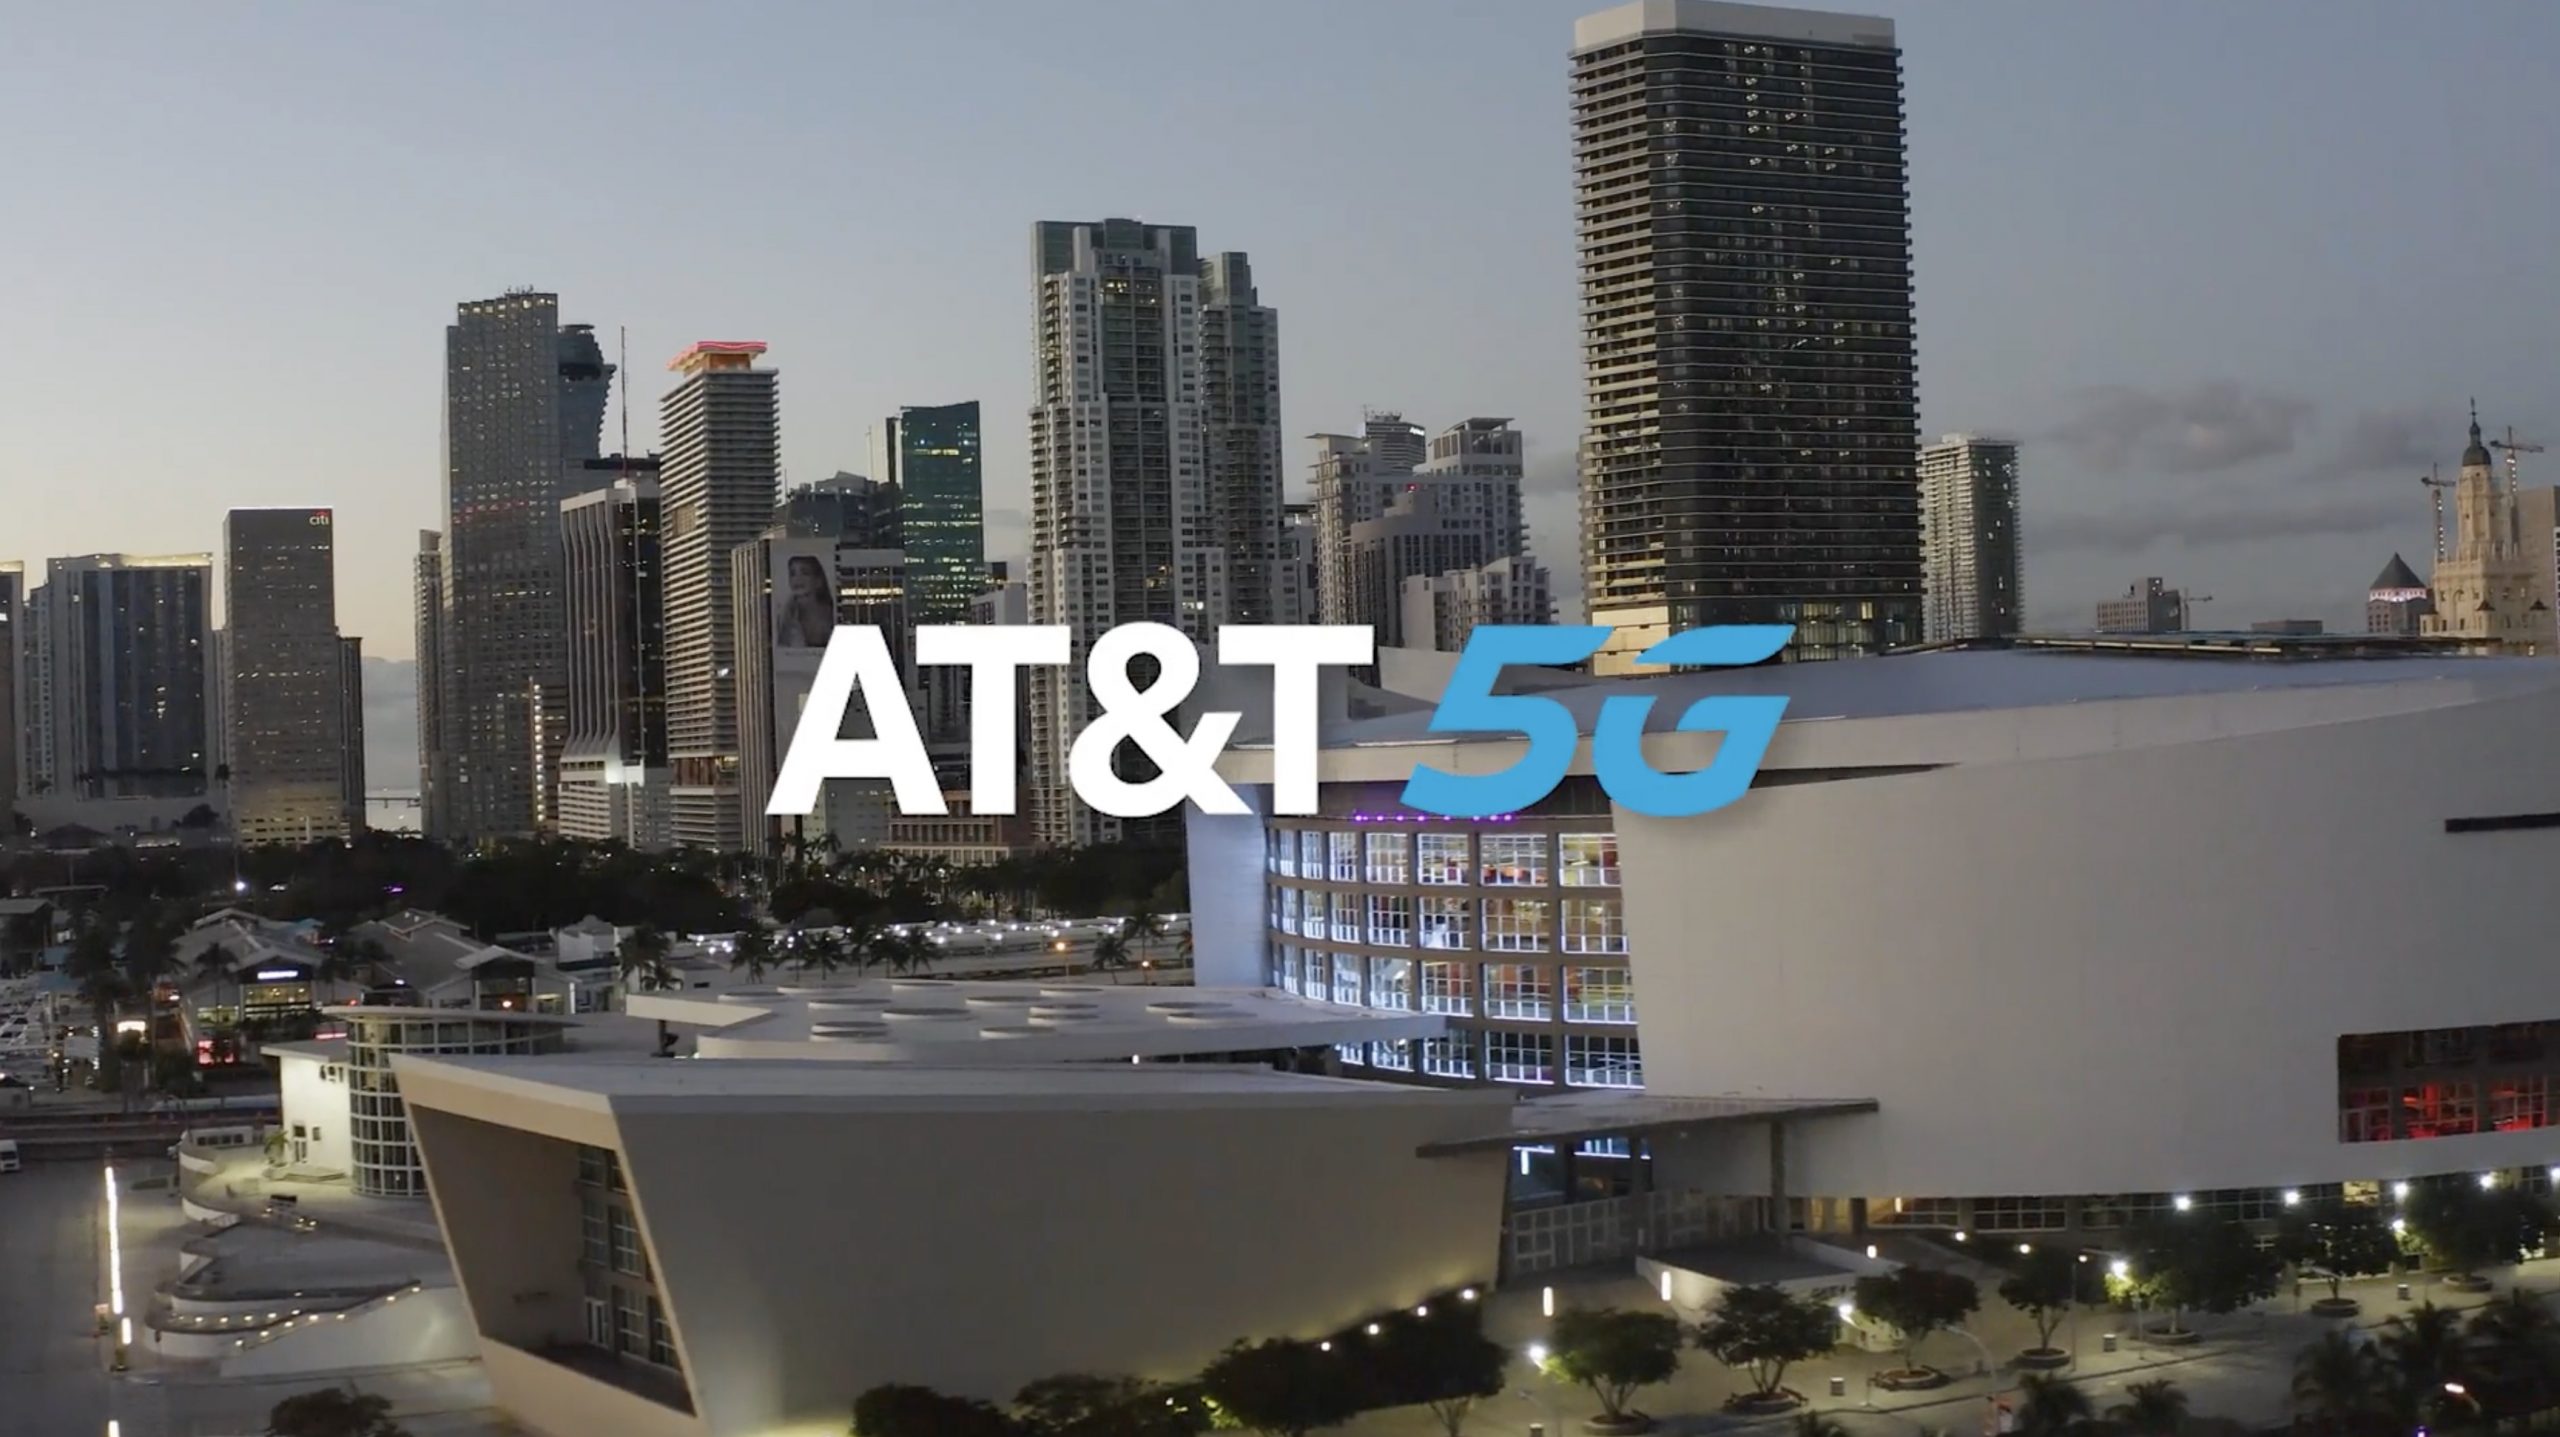 Drone view of Kaseya Center on Brickell Avenue with AT&T 5G logo overlaid